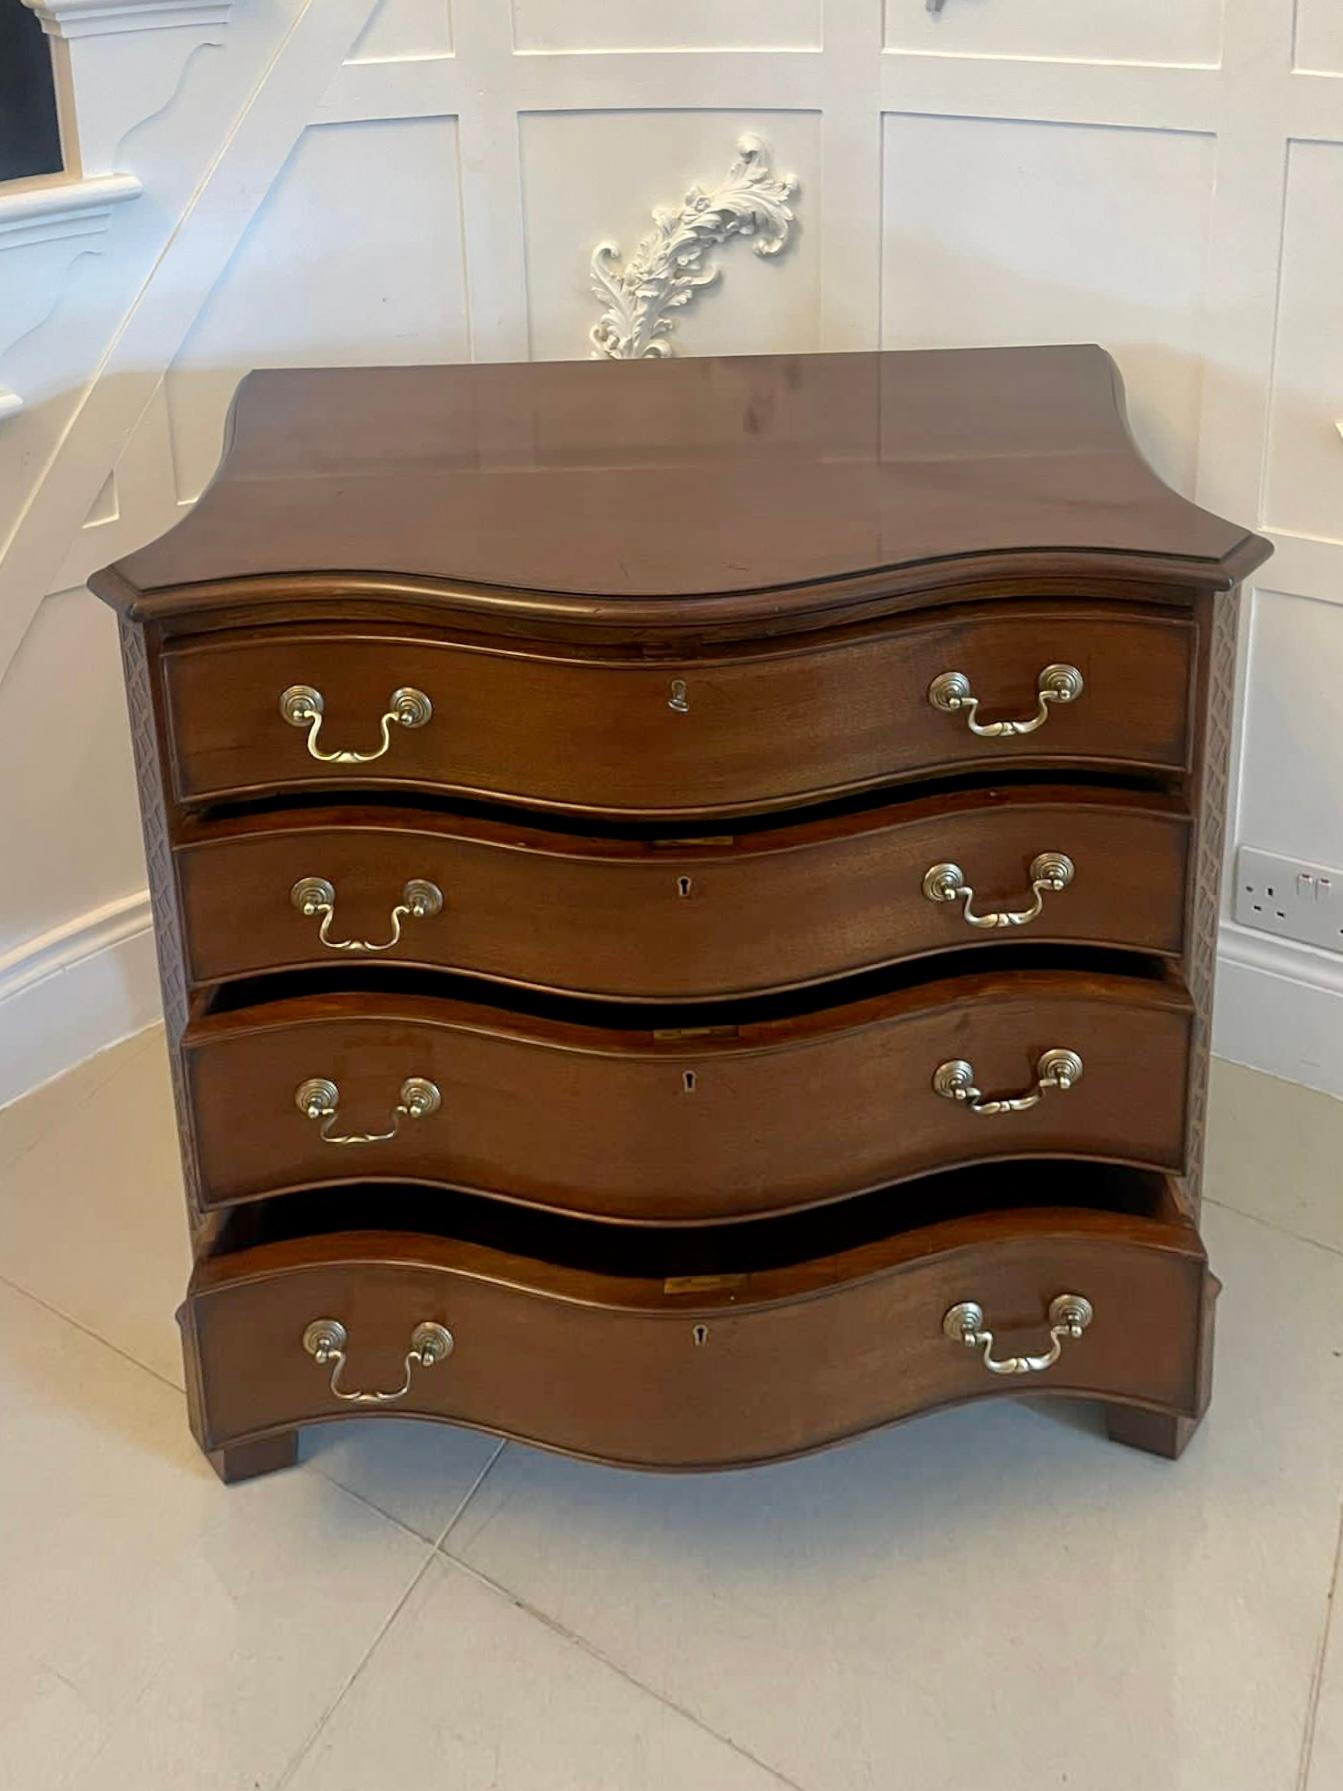 Antique Edwardian quality mahogany serpentine shaped chest of 4 drawers having a quality mahogany serpentine shaped top with a moulded edge above 4 serpentine shaped cockbeeded drawers with original brass swan neck handles, carved canted corners